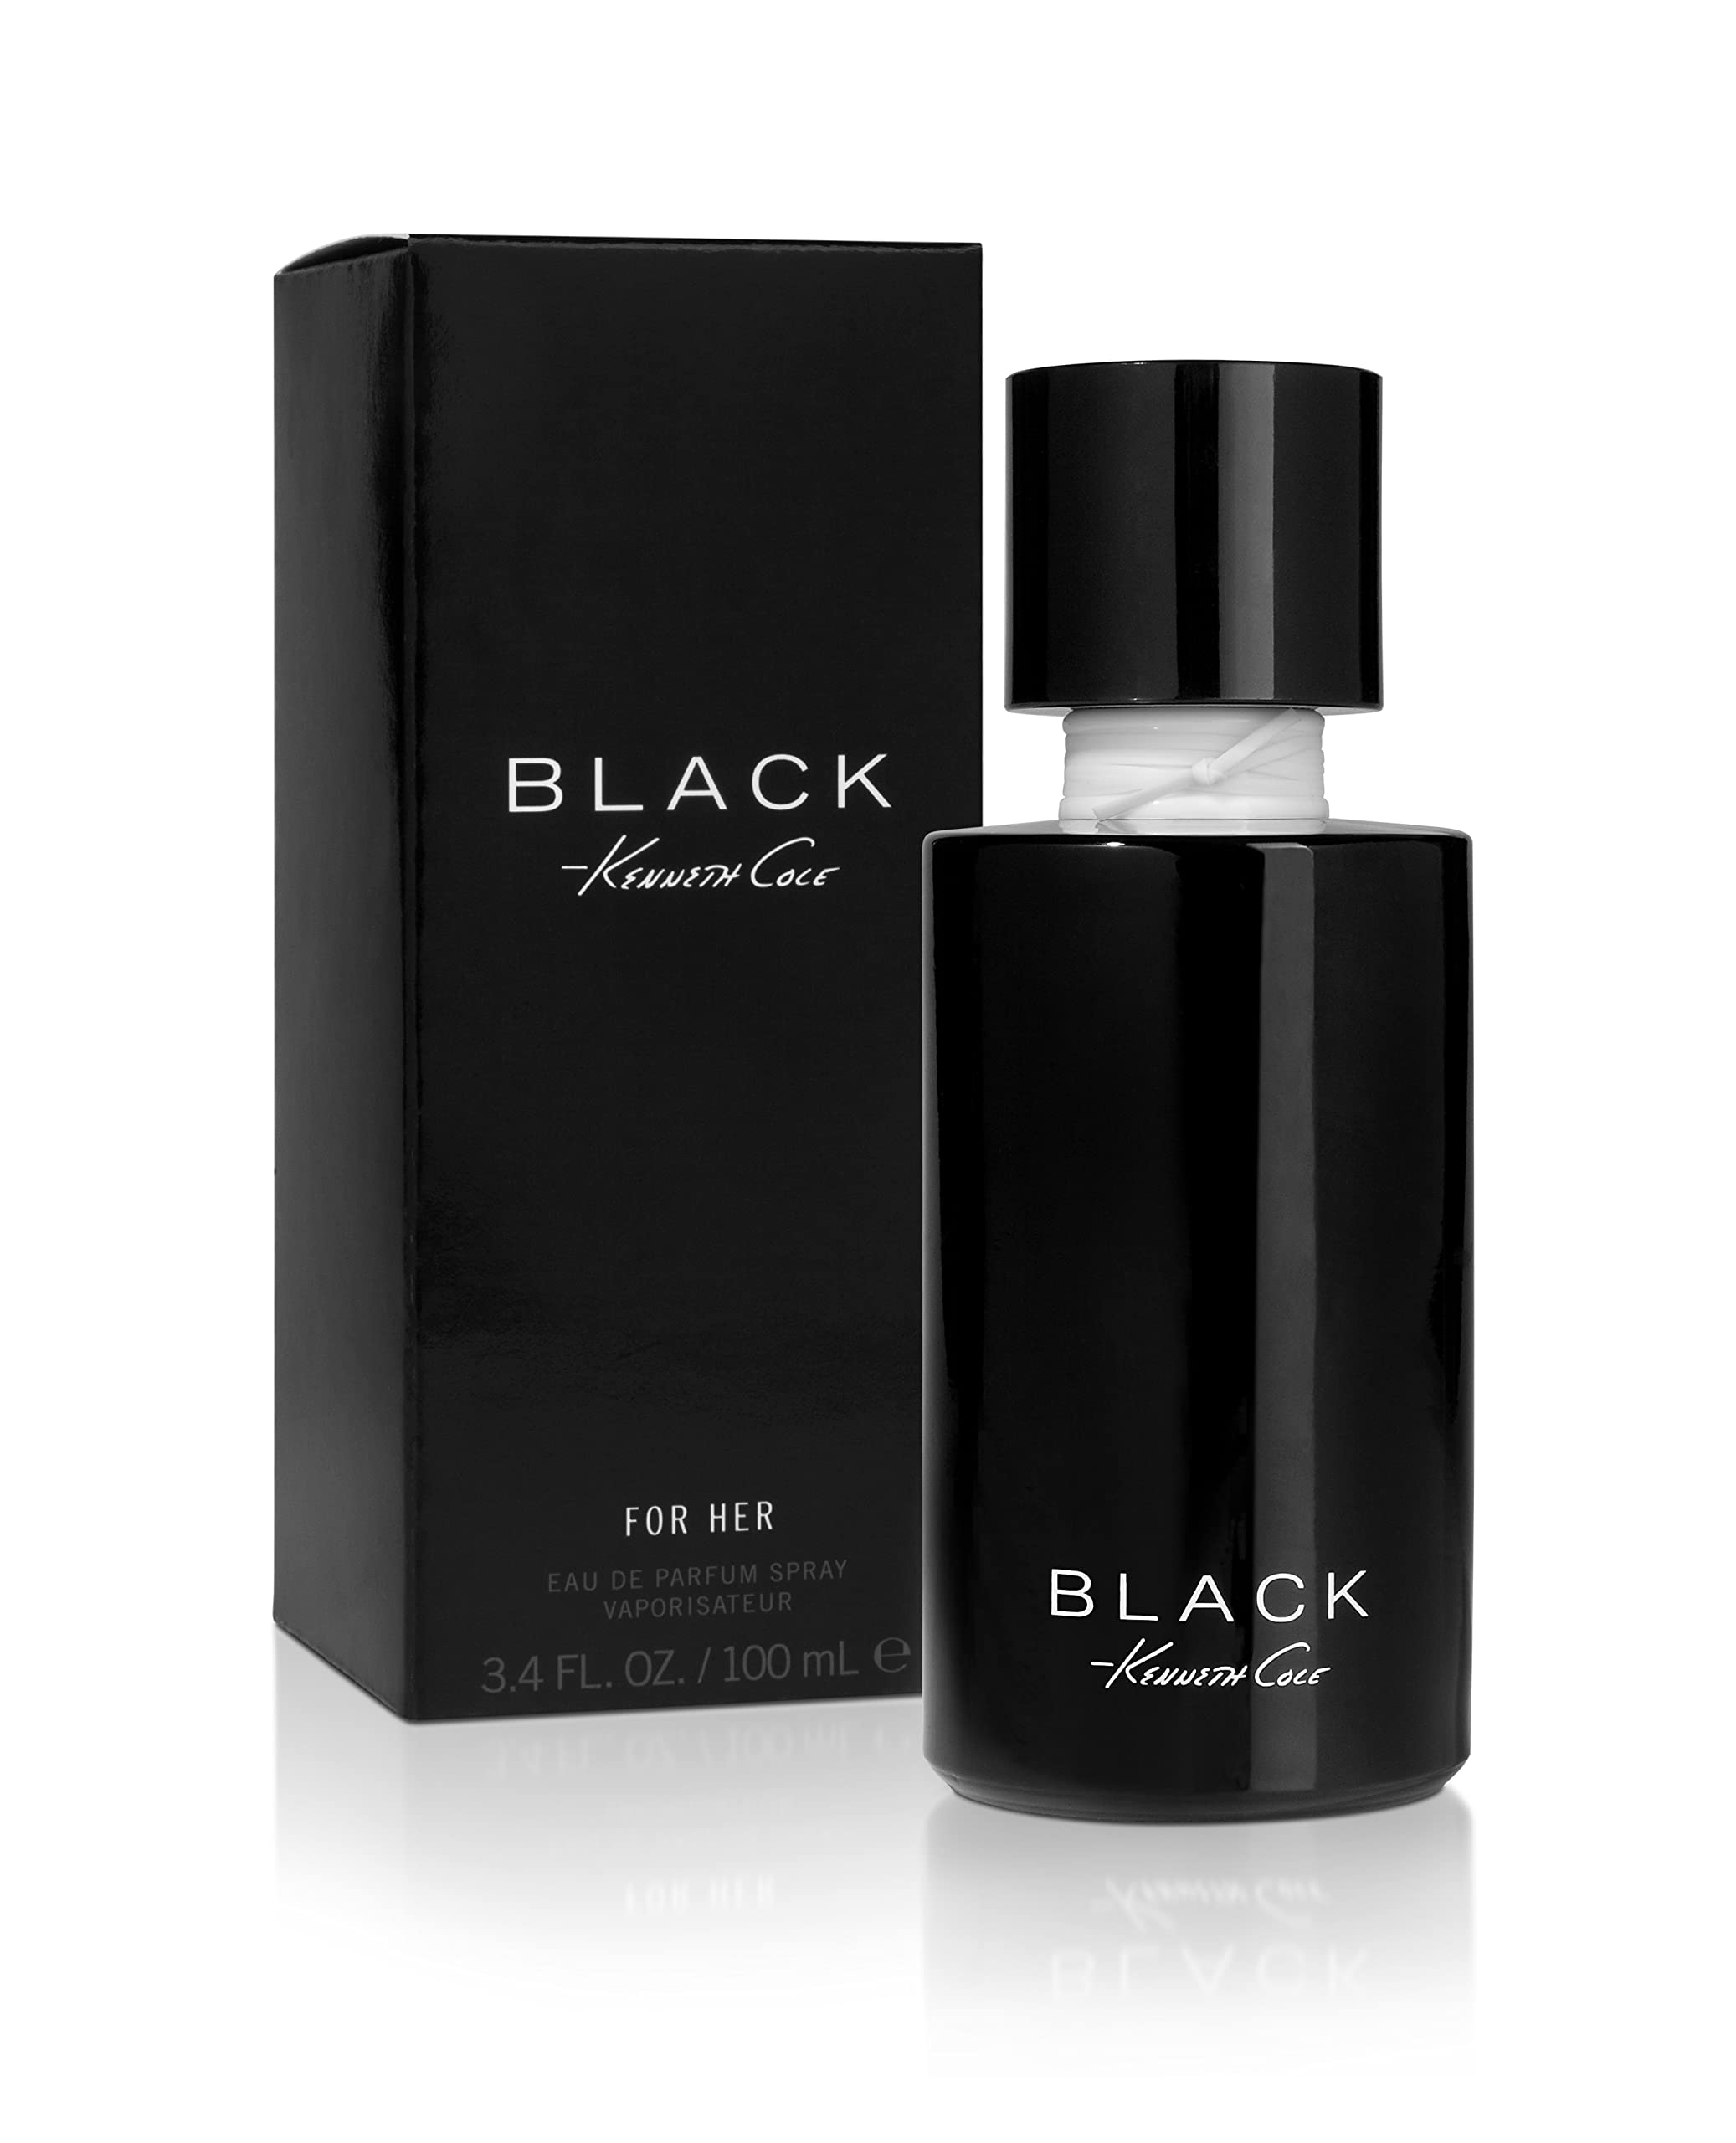 Kenneth Cole Black for Her Eau de Parfum Spray Perfume for Women, 3.4 Fl. Oz (Packaging may vary)